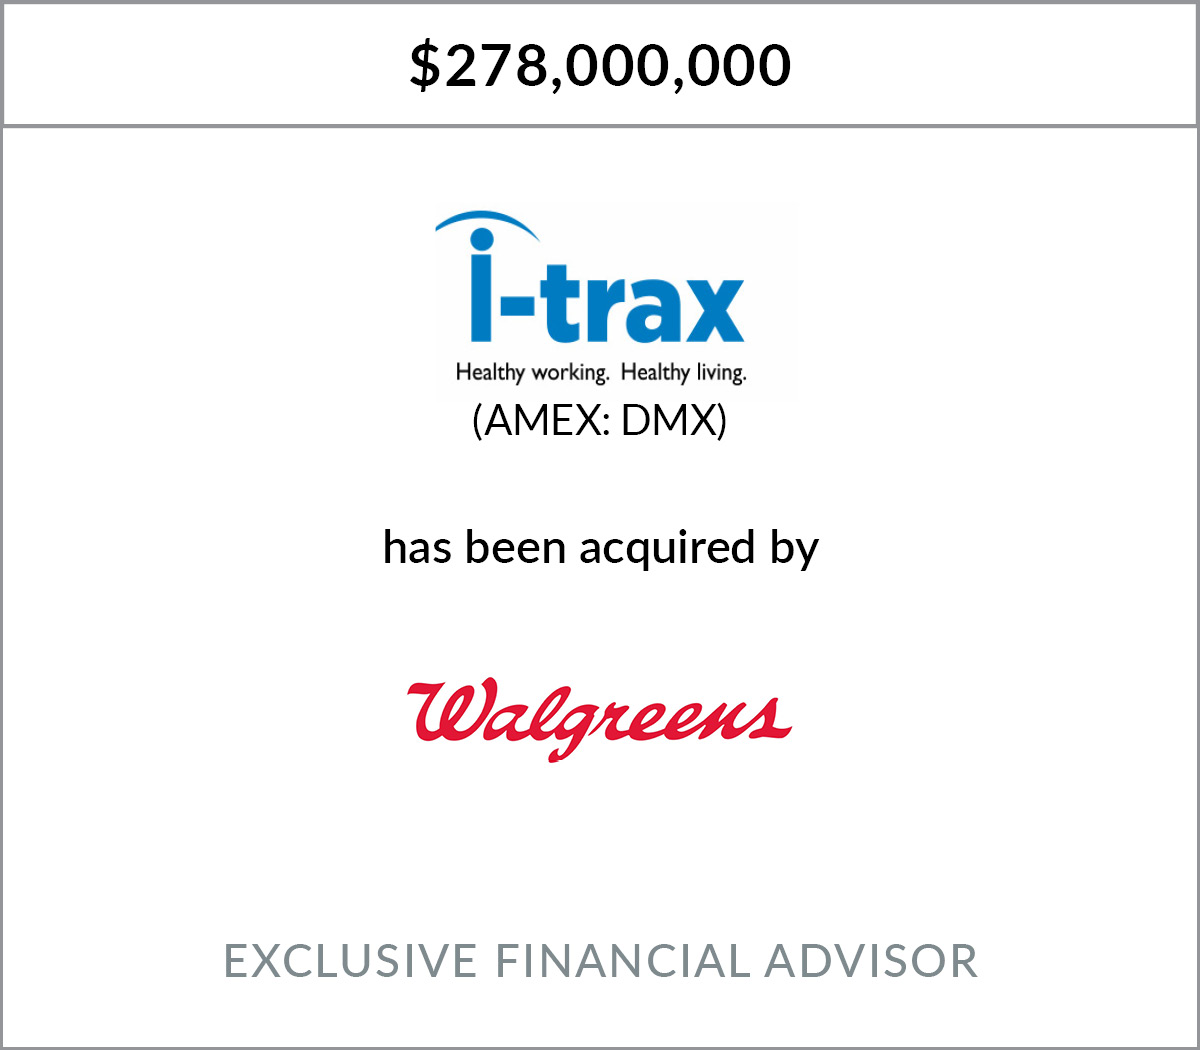 Walgreens Completes Acquisition of I-trax/CHD Meridian Healthcare